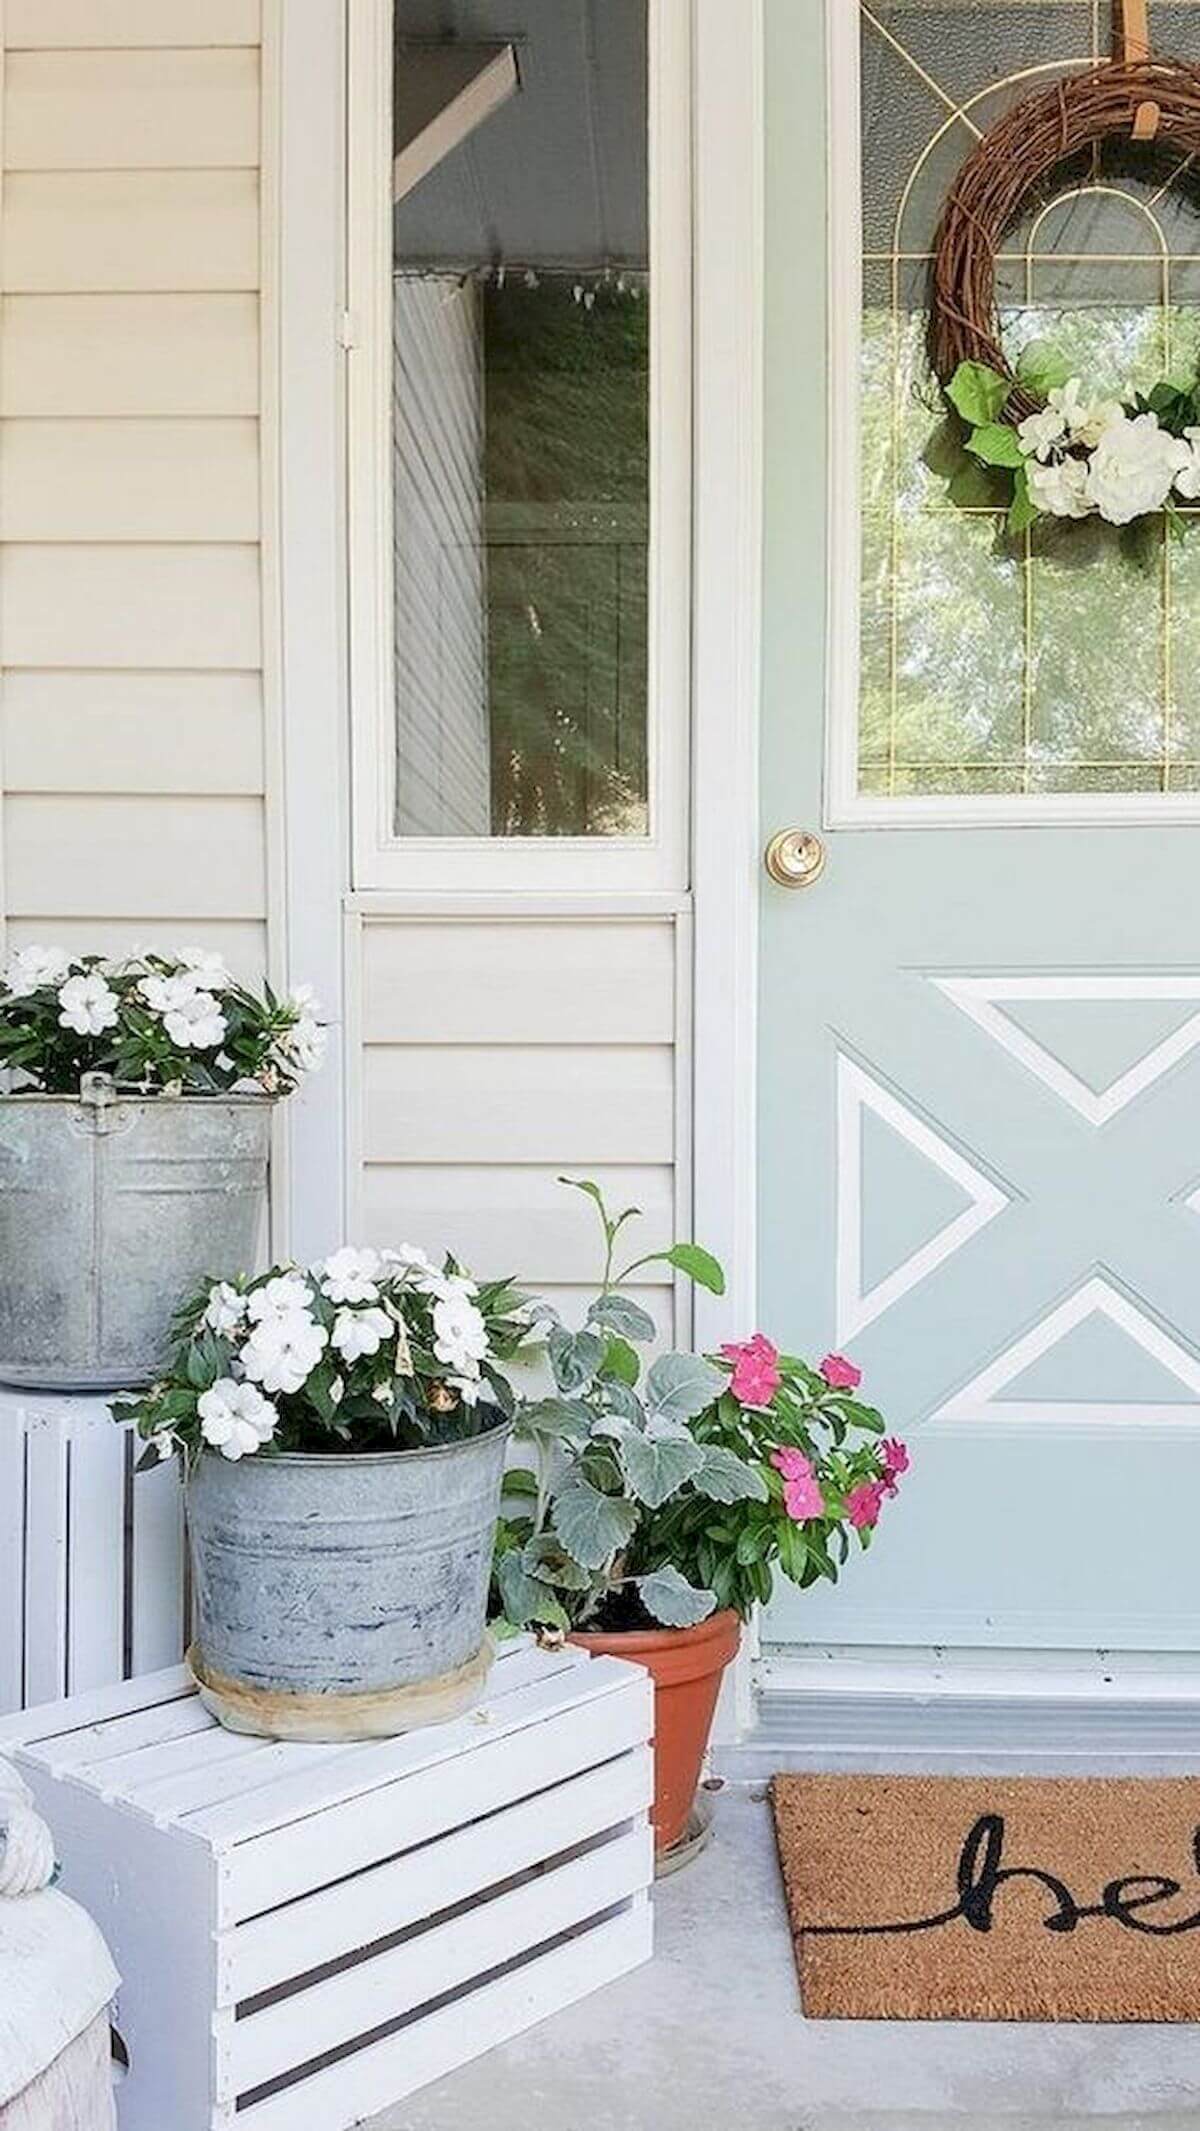 Cozy Up the Porch Corner with Crates and Planters